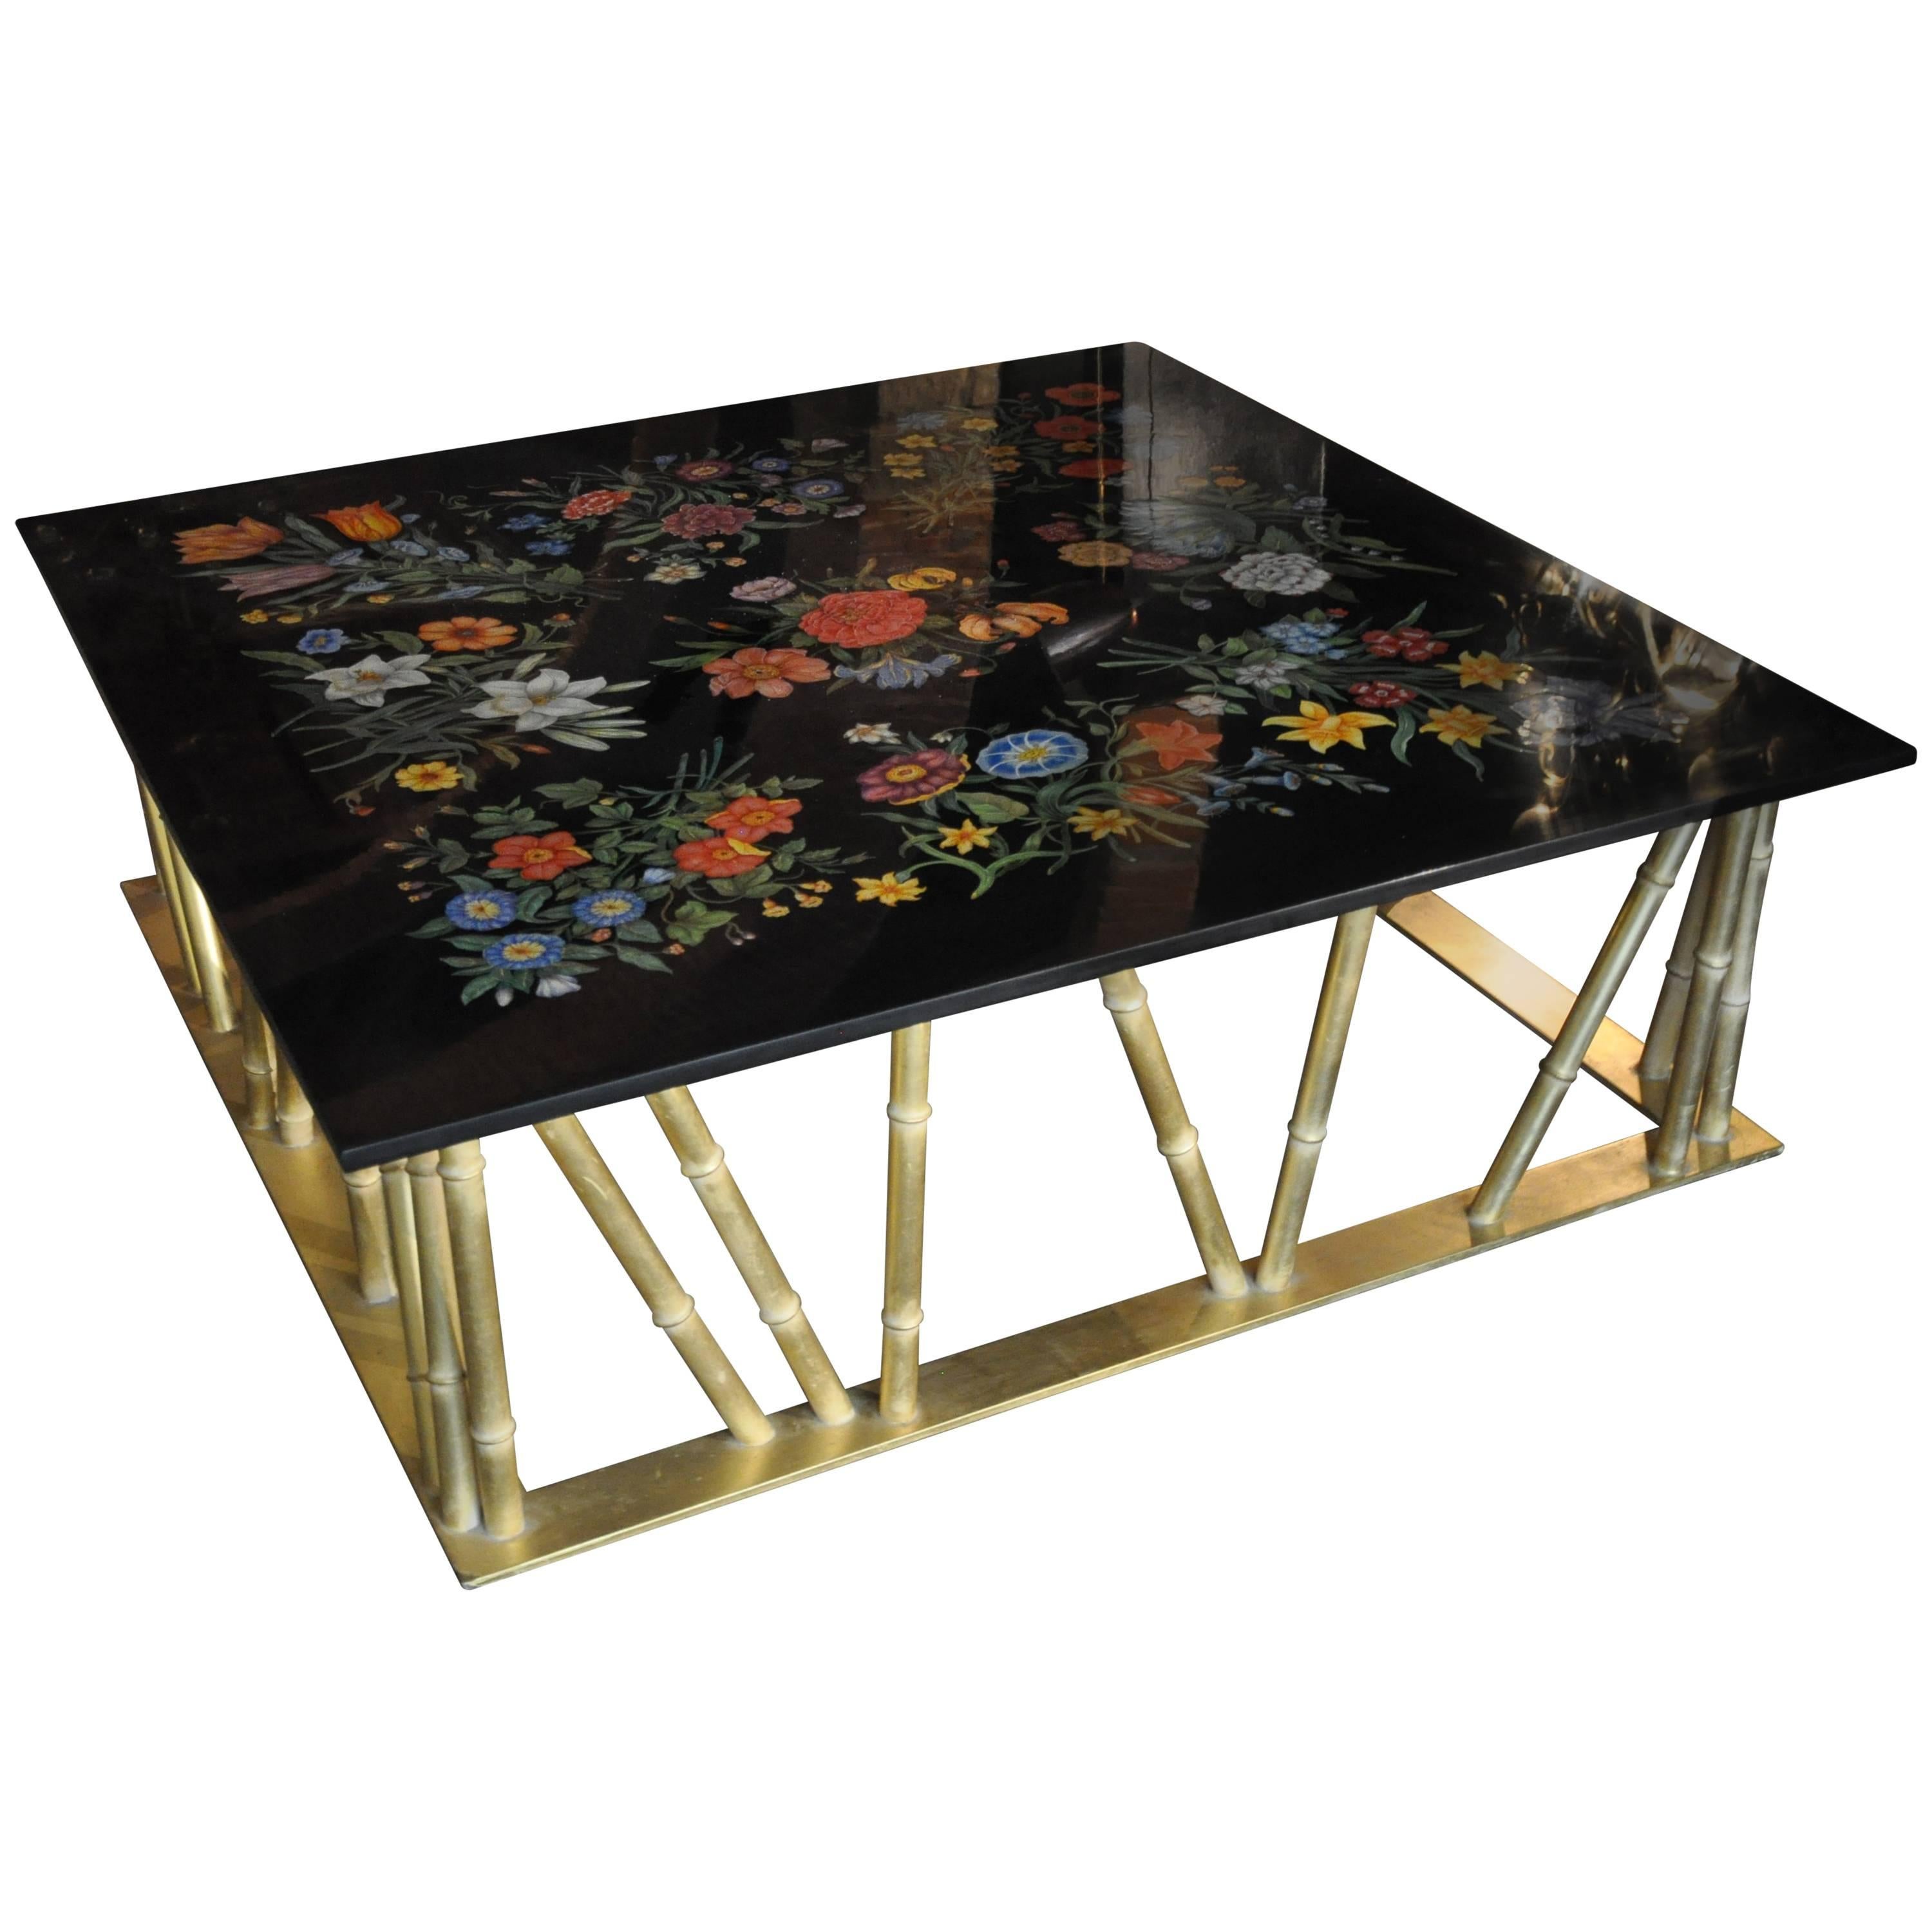 Scagliola Crafted Gucci Inspired Coffee Table For Sale